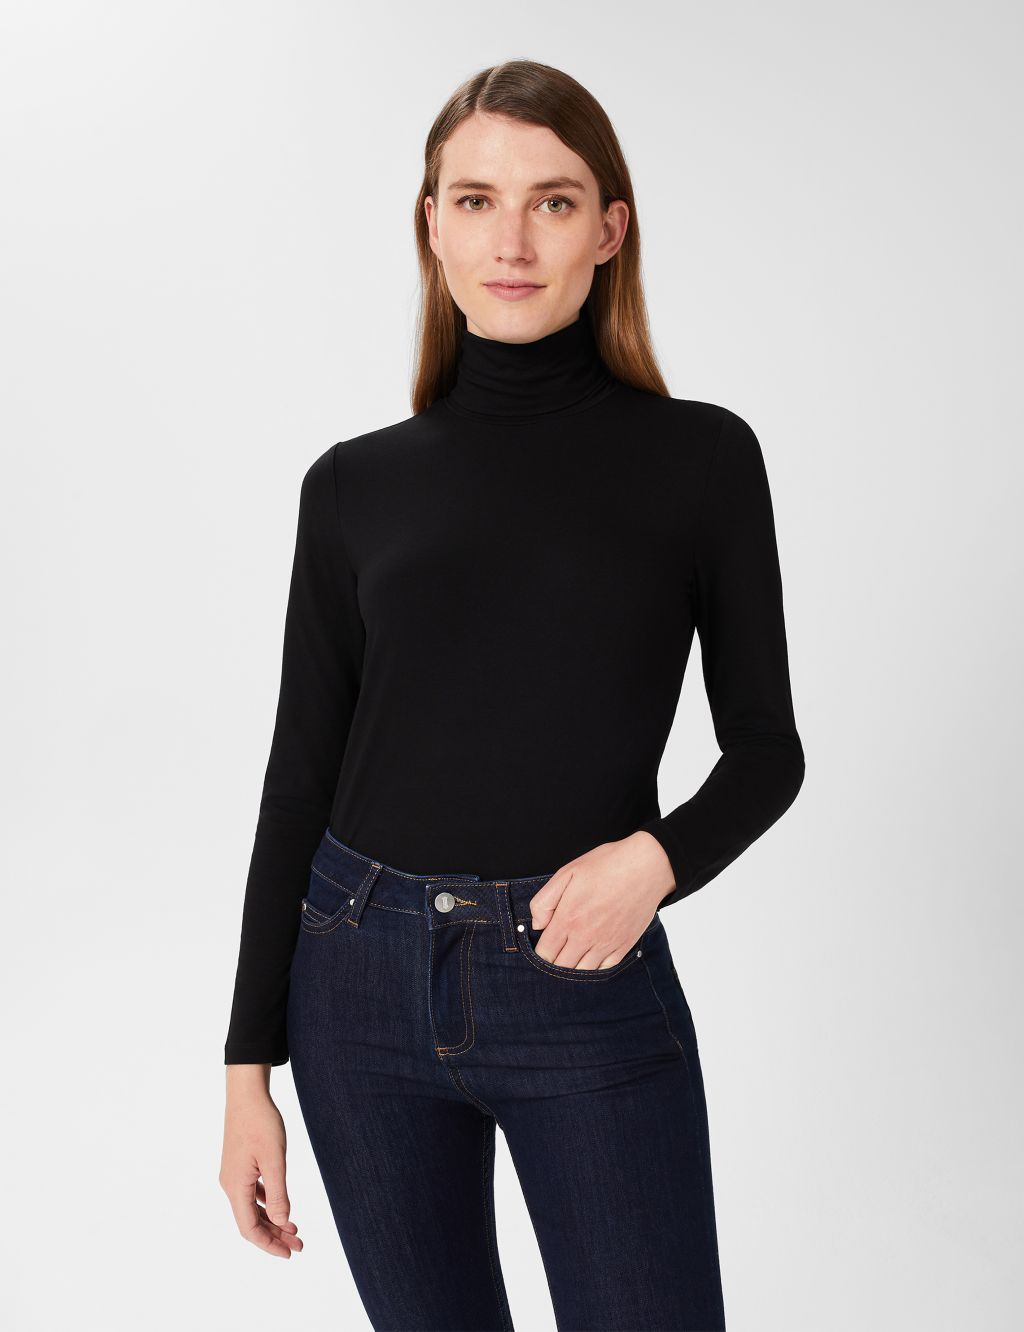 Tall Women's Knitted Tops